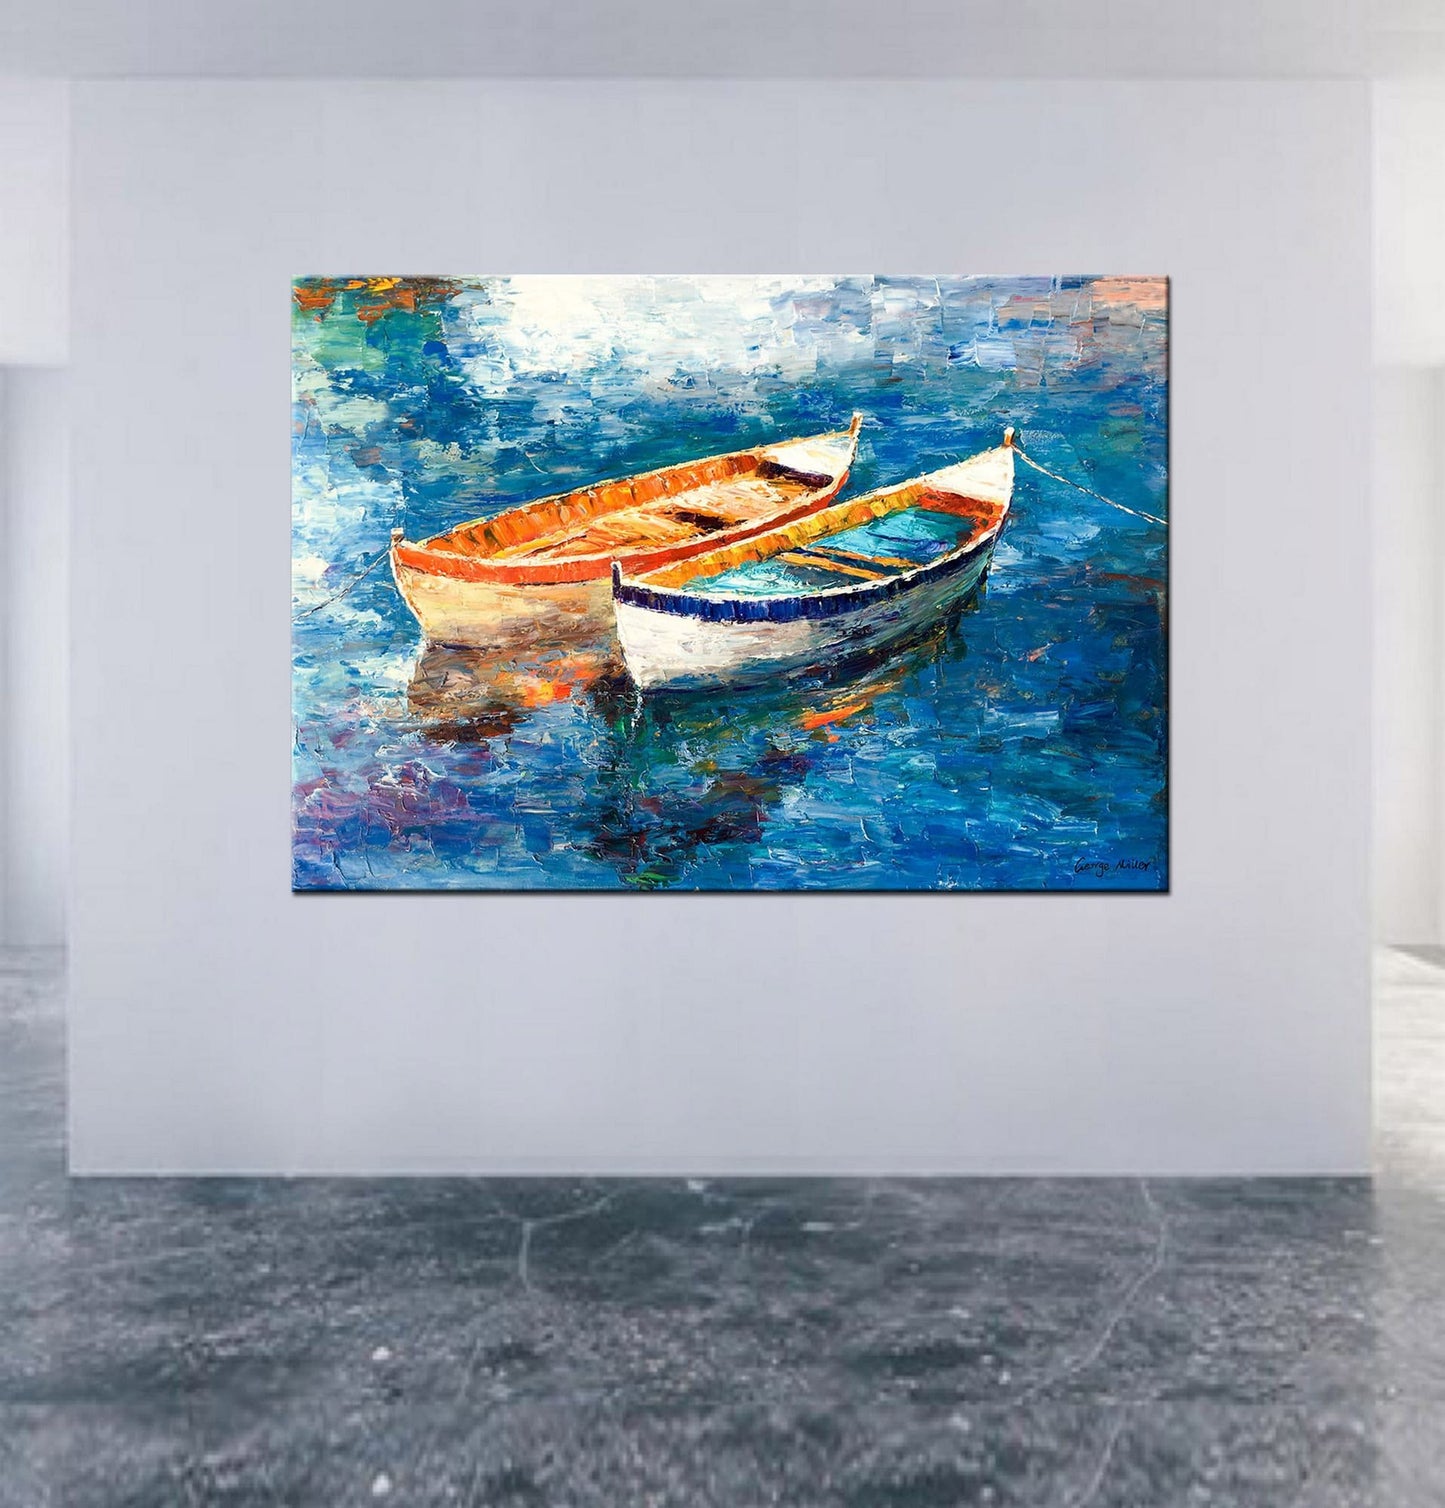 Large Oil Painting Fishing Boats, Living Room Wall Art, Original Oil Painting Seascape, Wall Decor, Original Artwork, Modern Canvas Painting